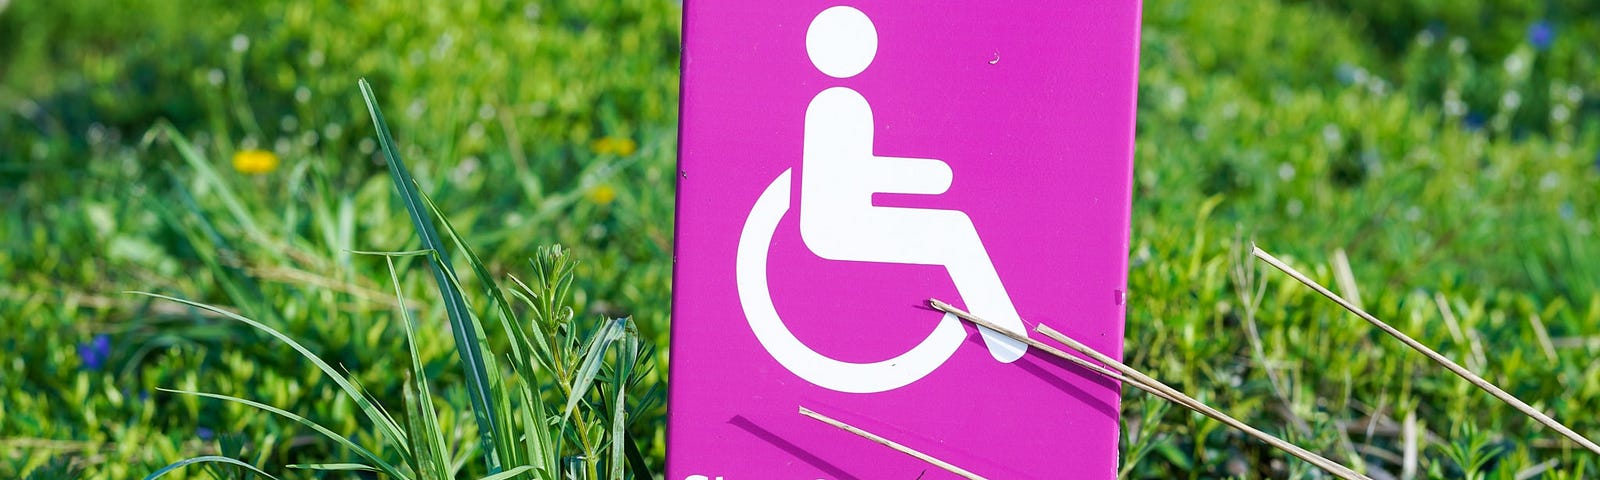 Magenta sign on green grass, with the disability symbol, the text “Step free route” and an arrow pointing to the right